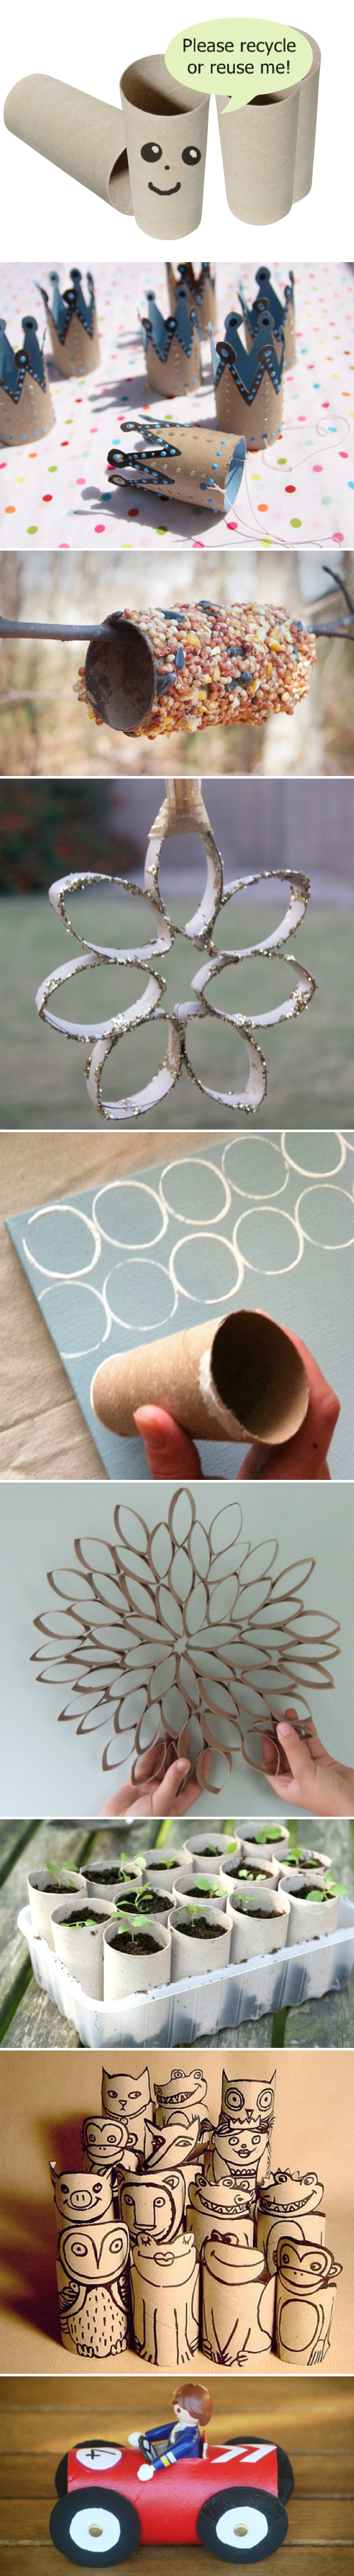 Cute Toilet Paper Roll Crafts